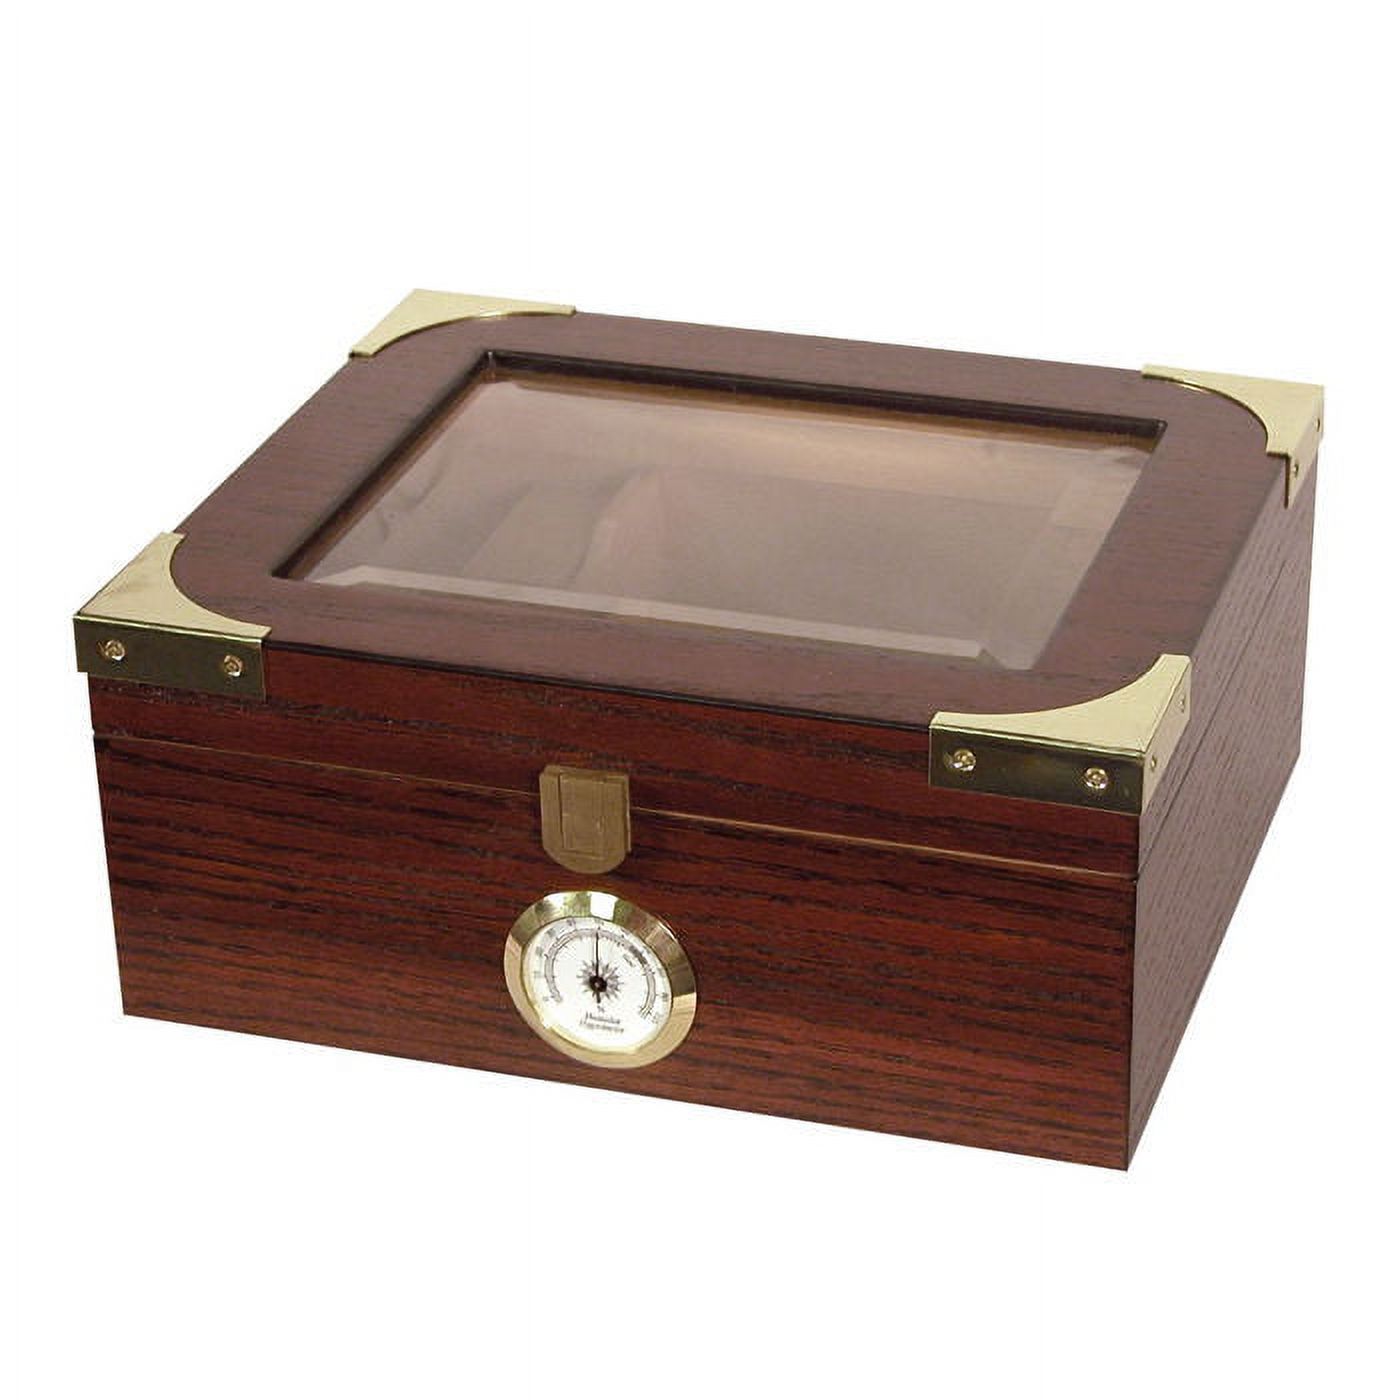 Deluxe Glass-Top Humidor (20-50 Cigars) - image 2 of 3